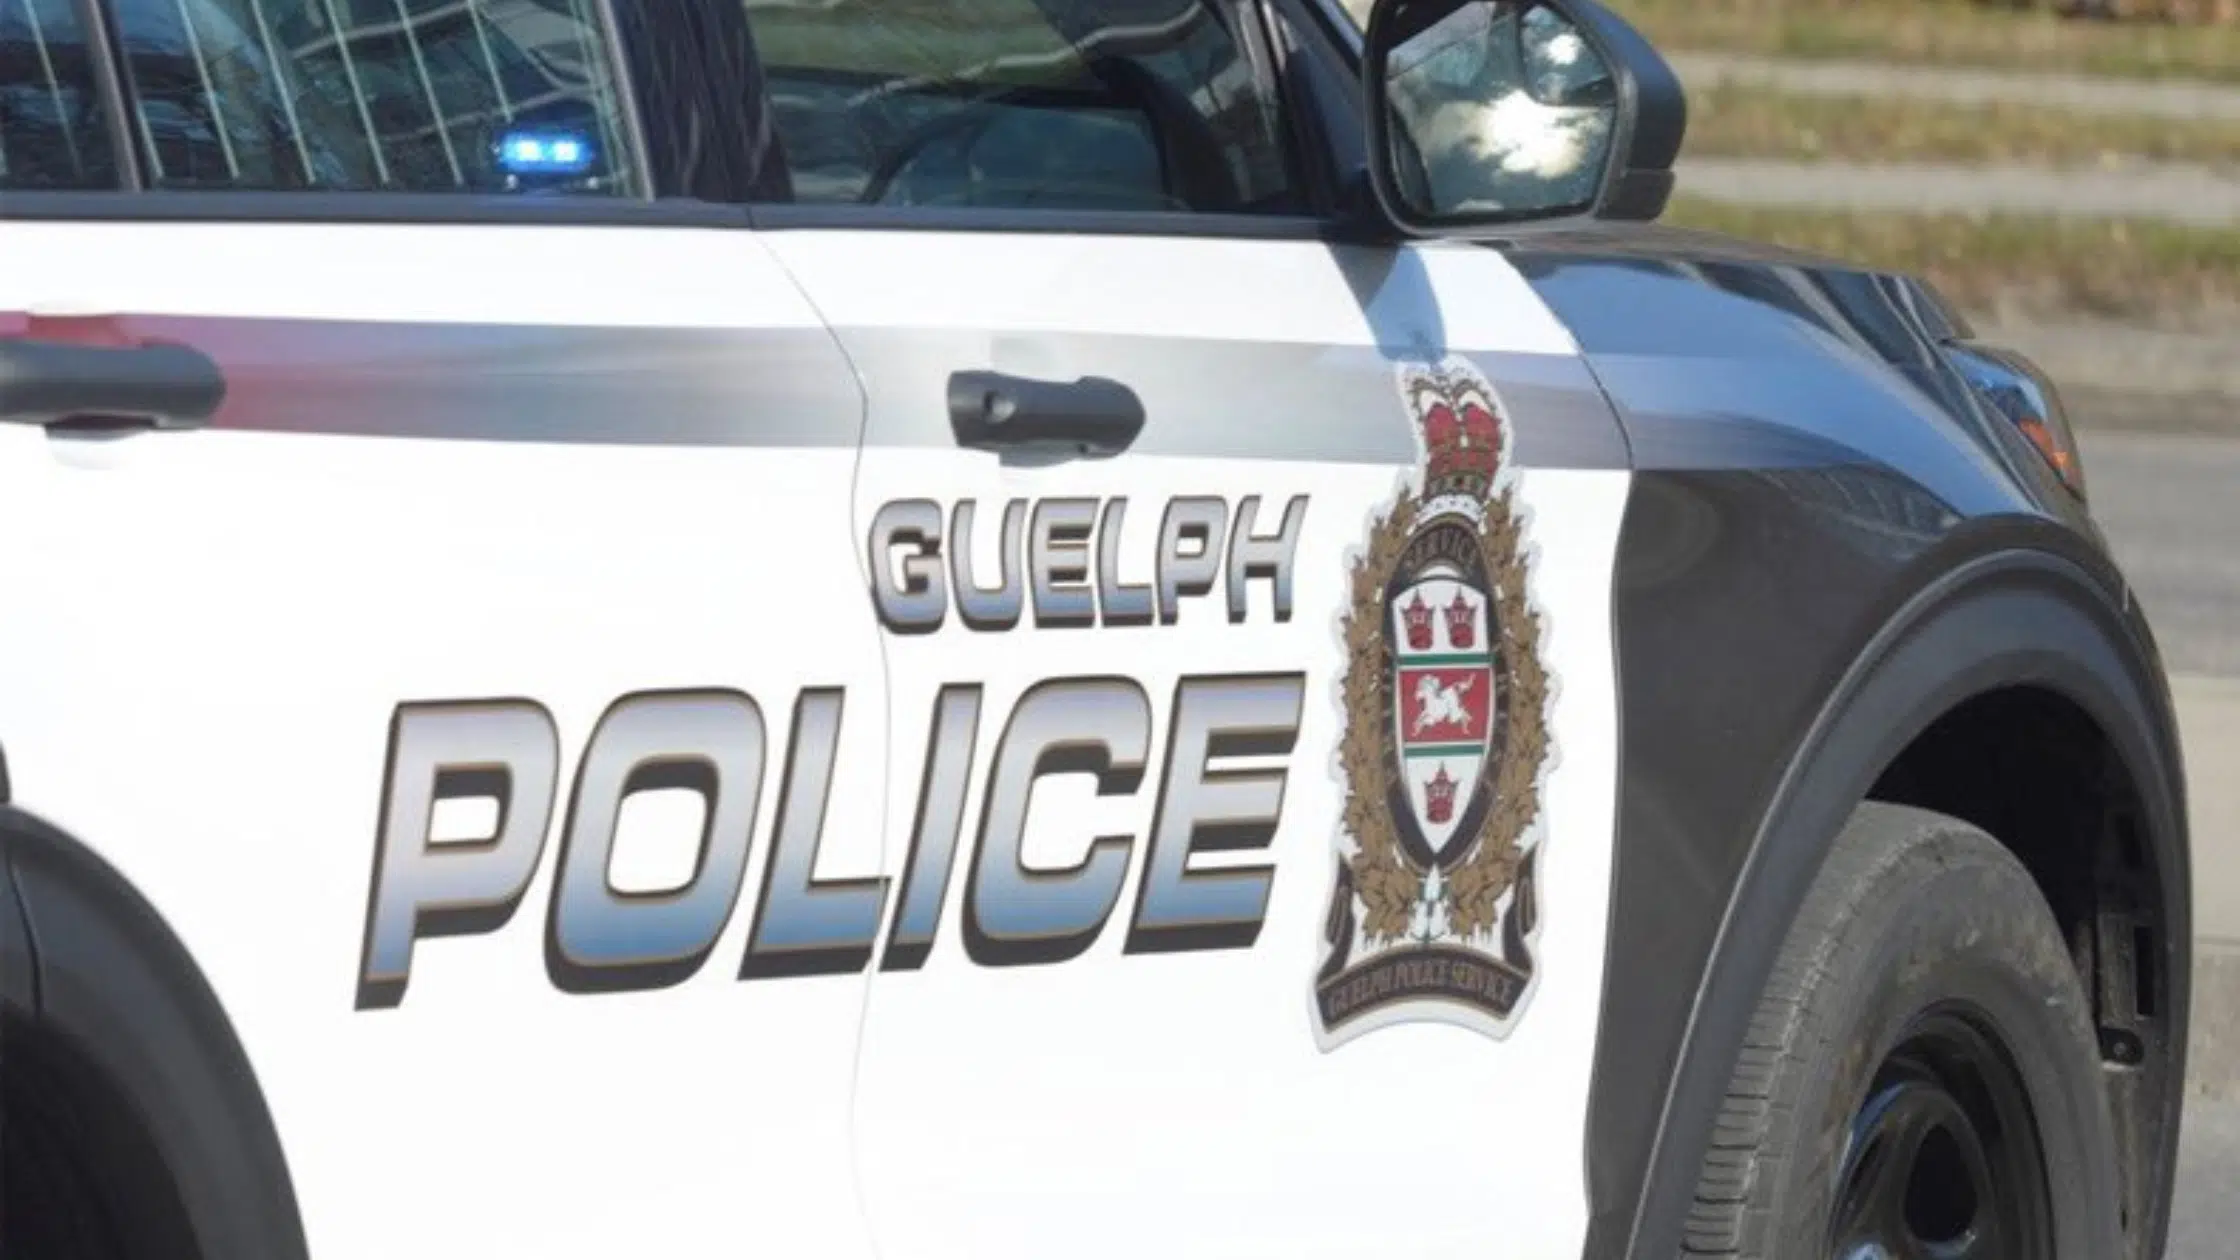 Missing Person Found Deceased in Guelph: Police